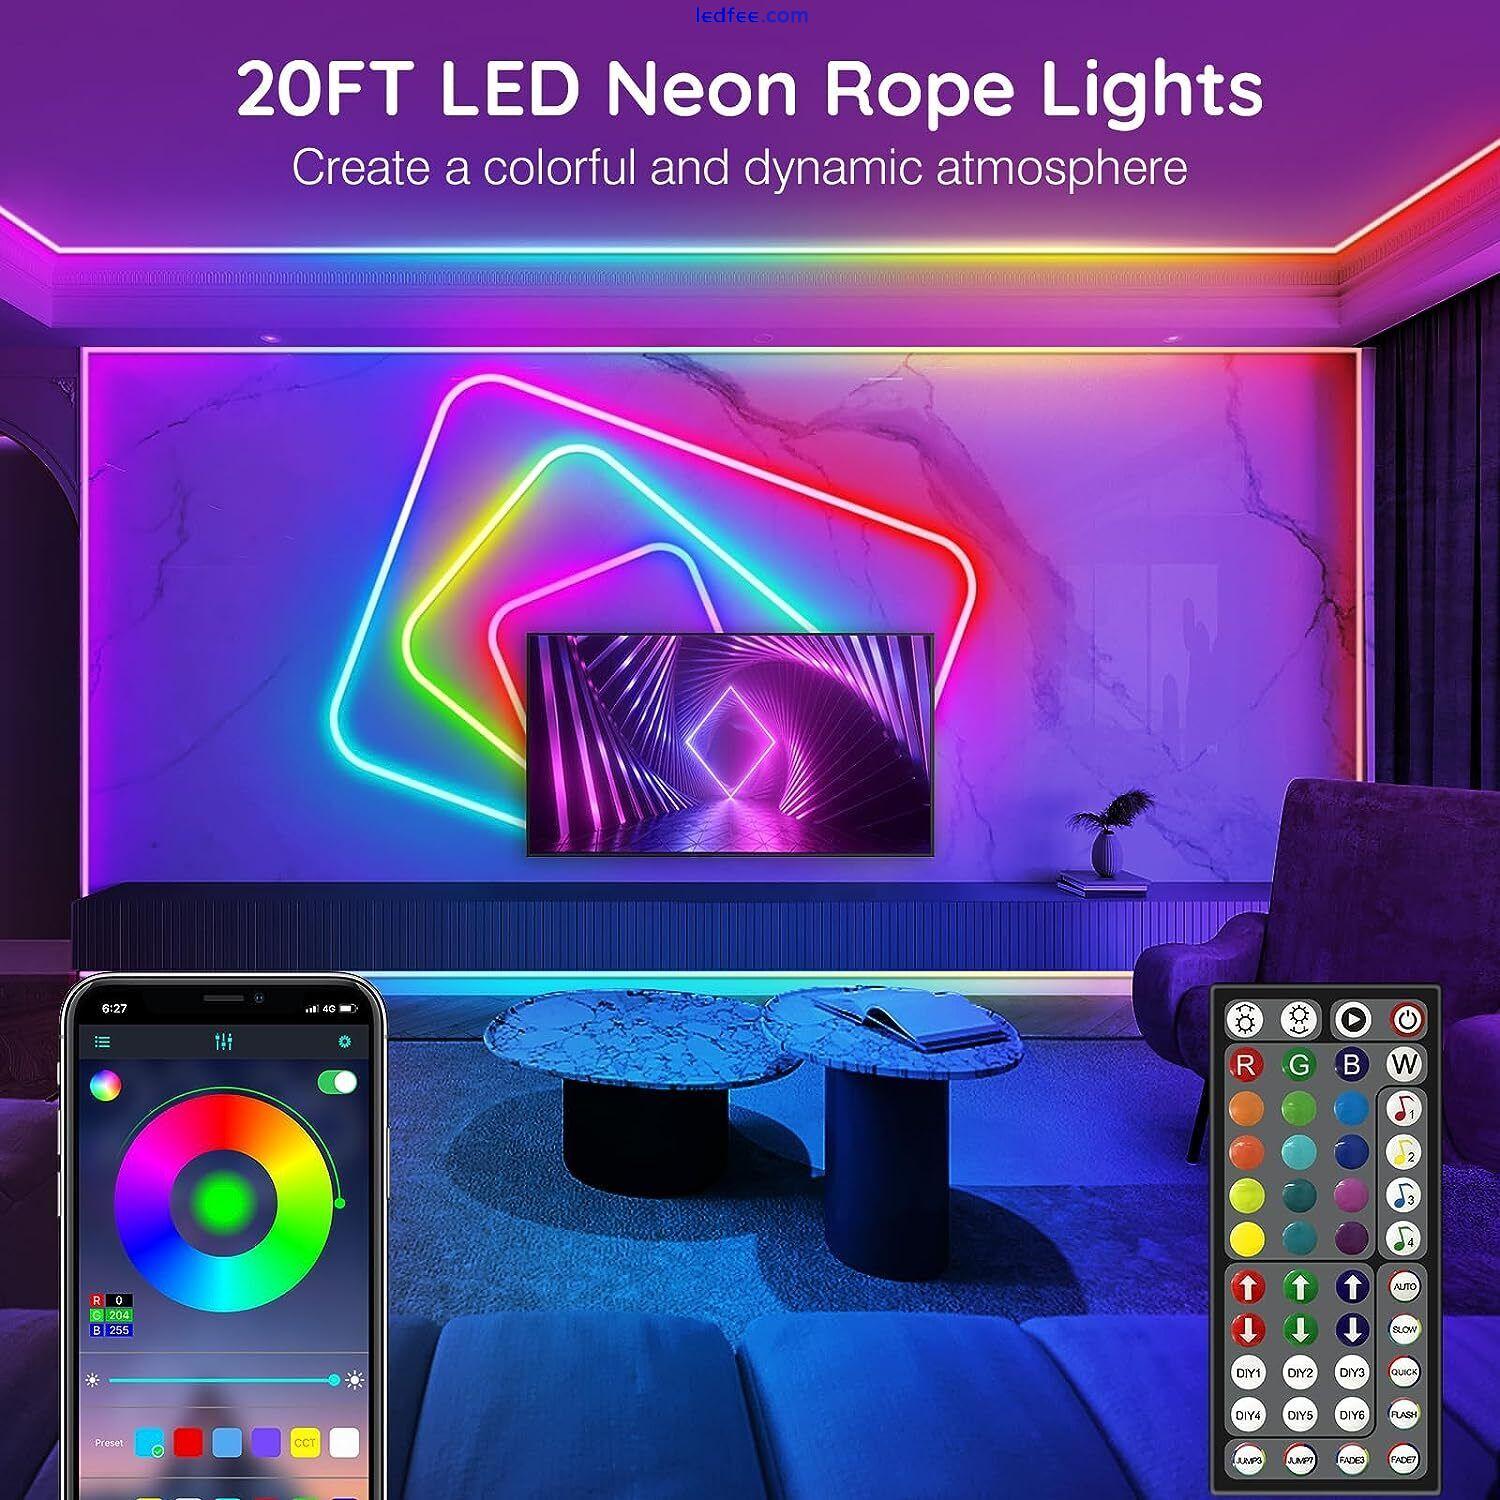 AILBTON 6m Led Neon Rope Lights,Flexible Led Rope Lights,Control with Modes,IP65 0 